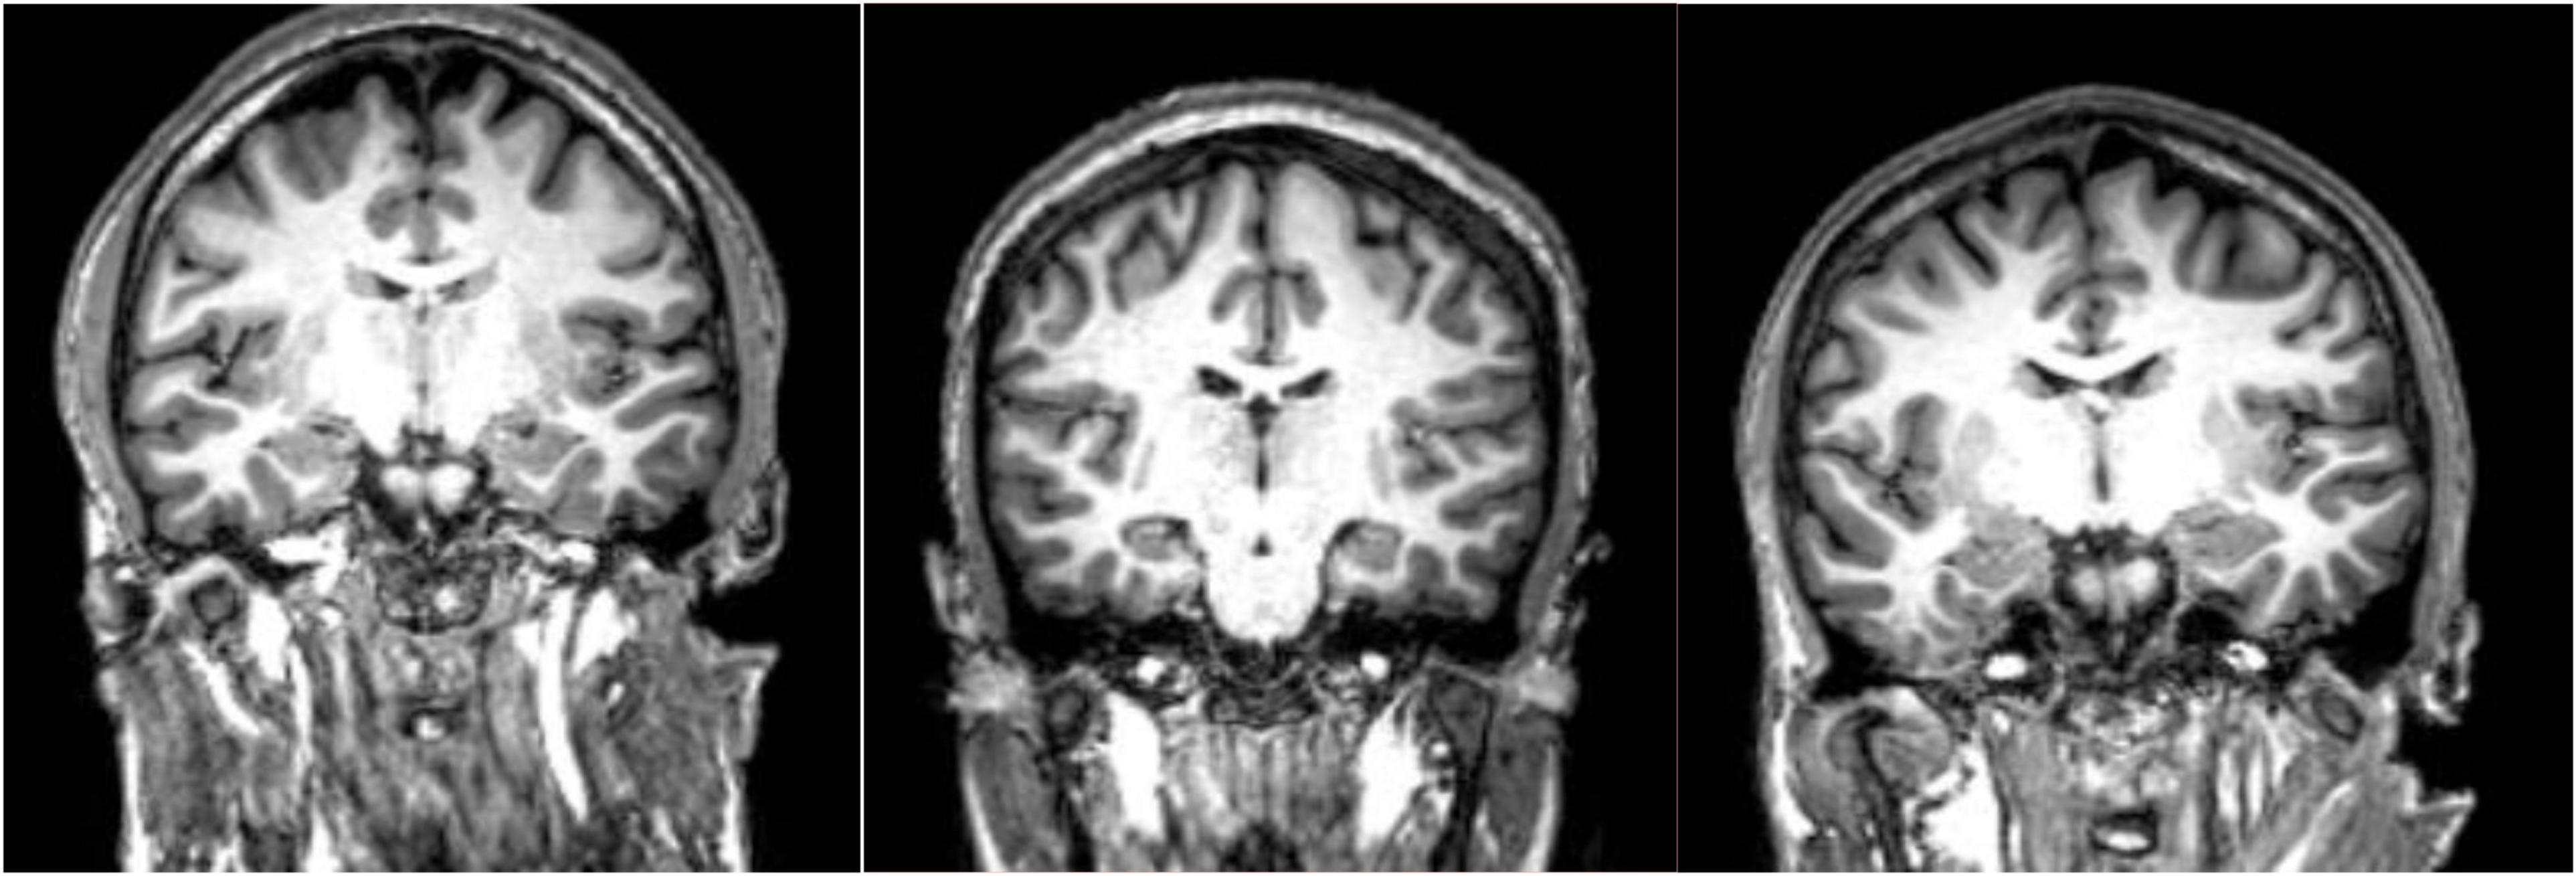 Frontiers | Neuroimaging in schizophrenia: A review article